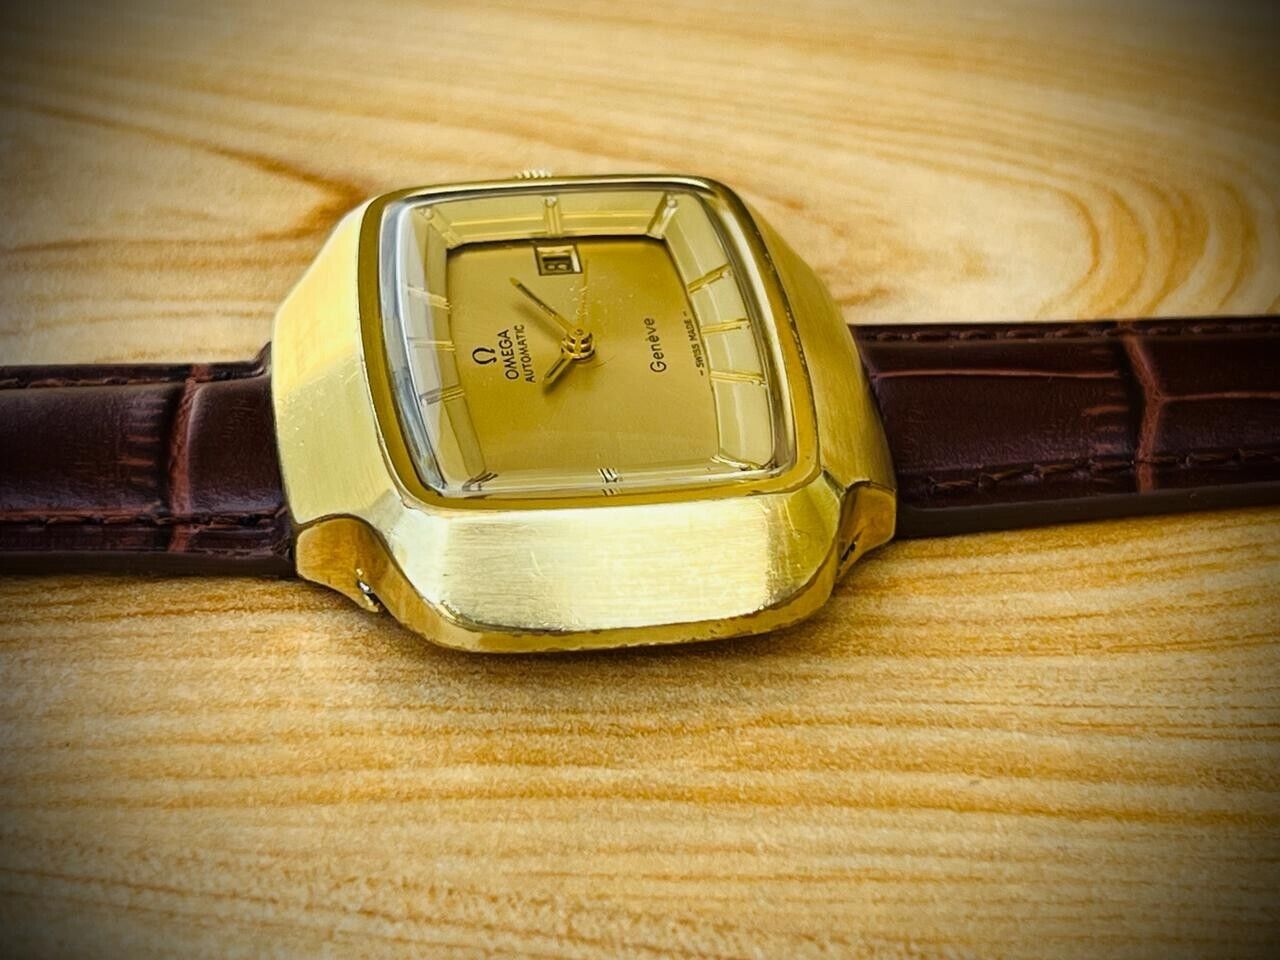 Vintage Omega Geneve 166.0123 TV Shape Automatic Cal.1481 Mens Watch, 1973, Rare - Grab A Watch Co